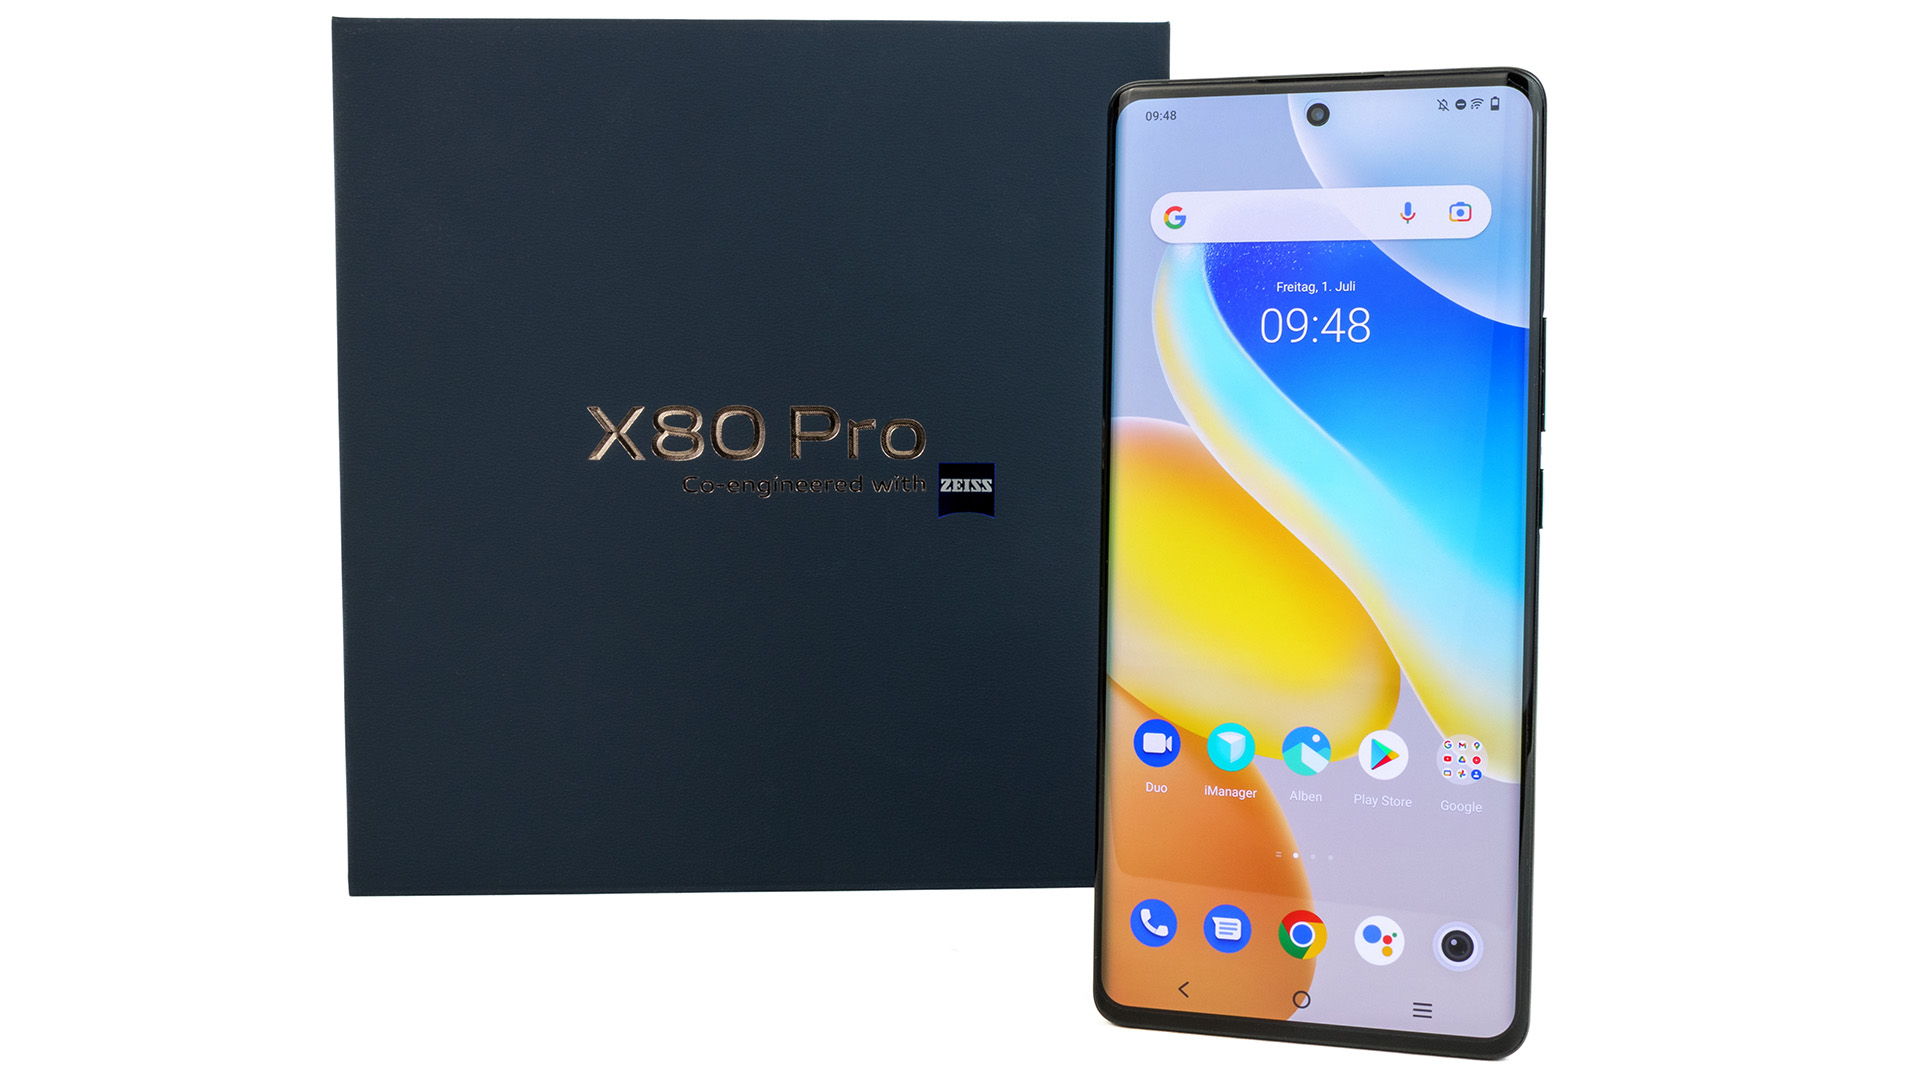 Vivo X80 Pro Camera Review  The Best Camera Phone for 2022? 